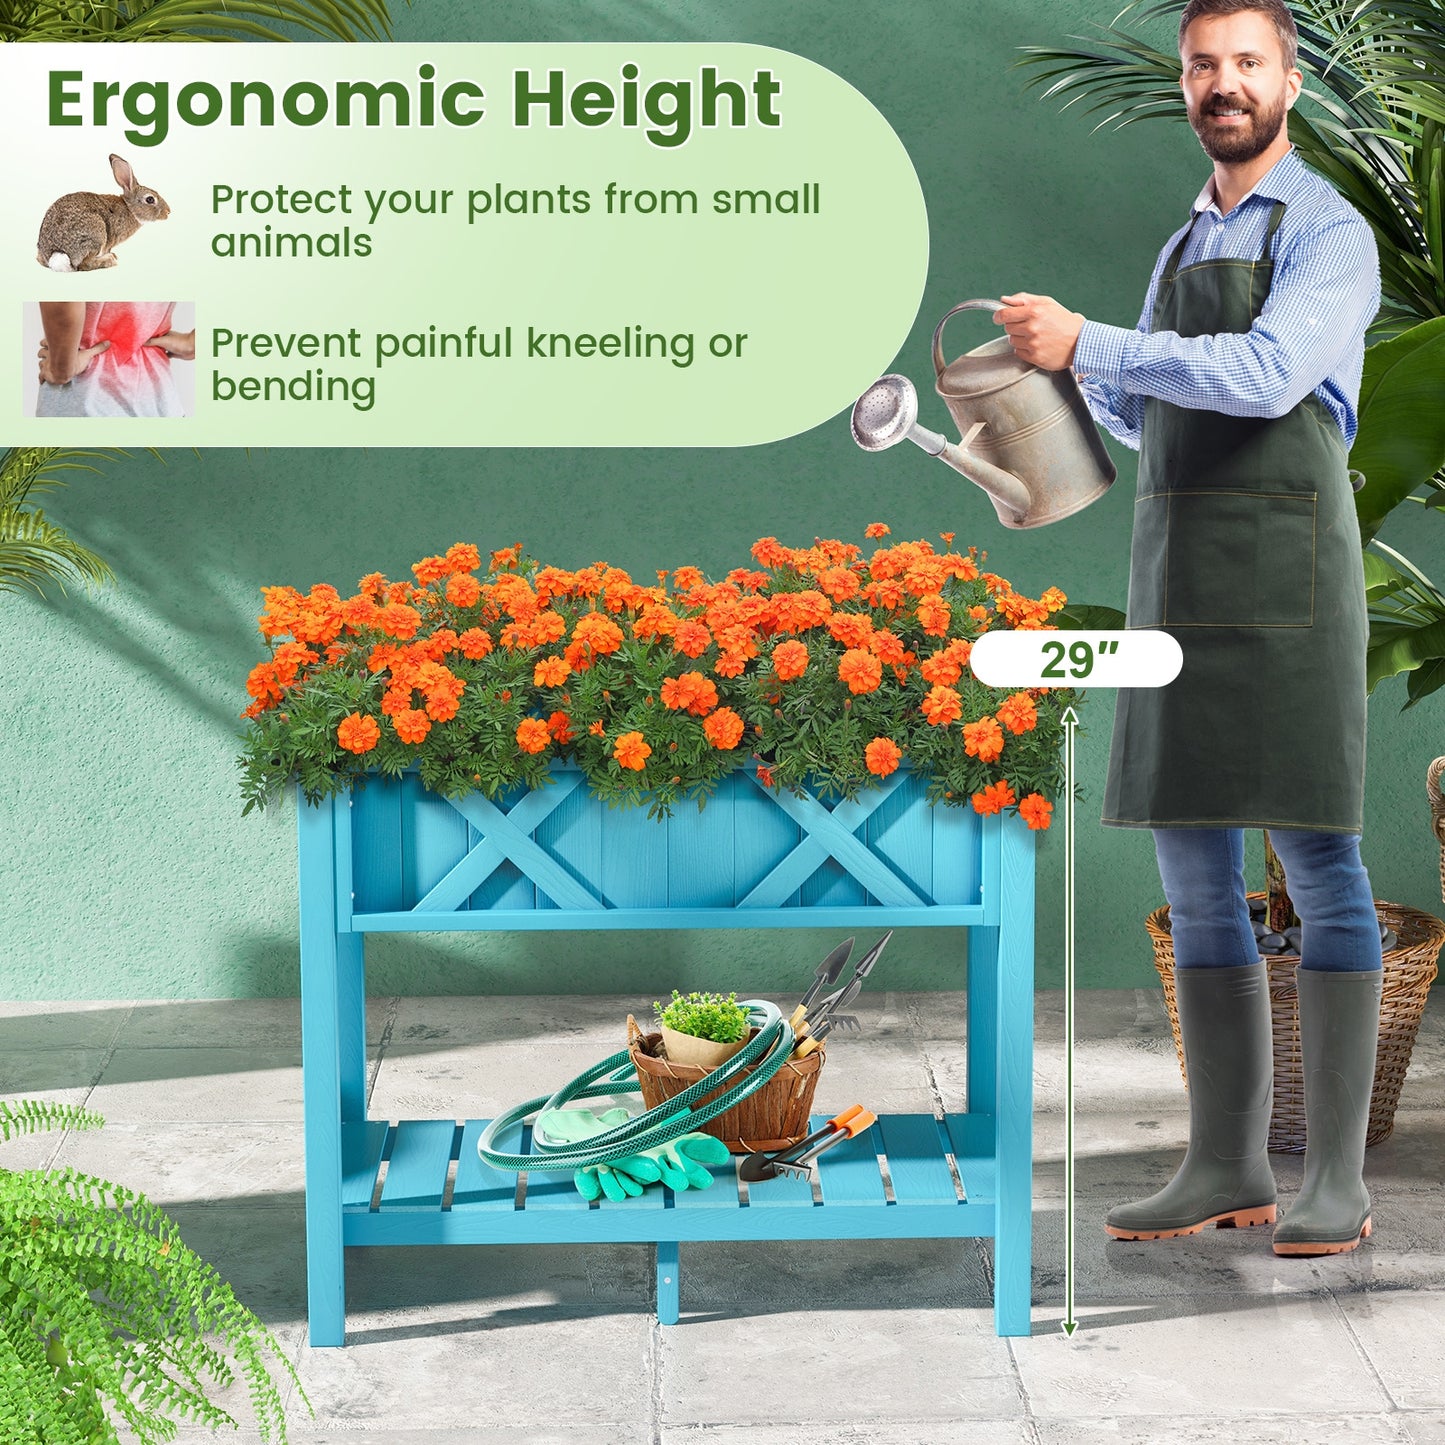 HIPS Raised Garden Bed Poly Wood Elevated Planter Box-Blue